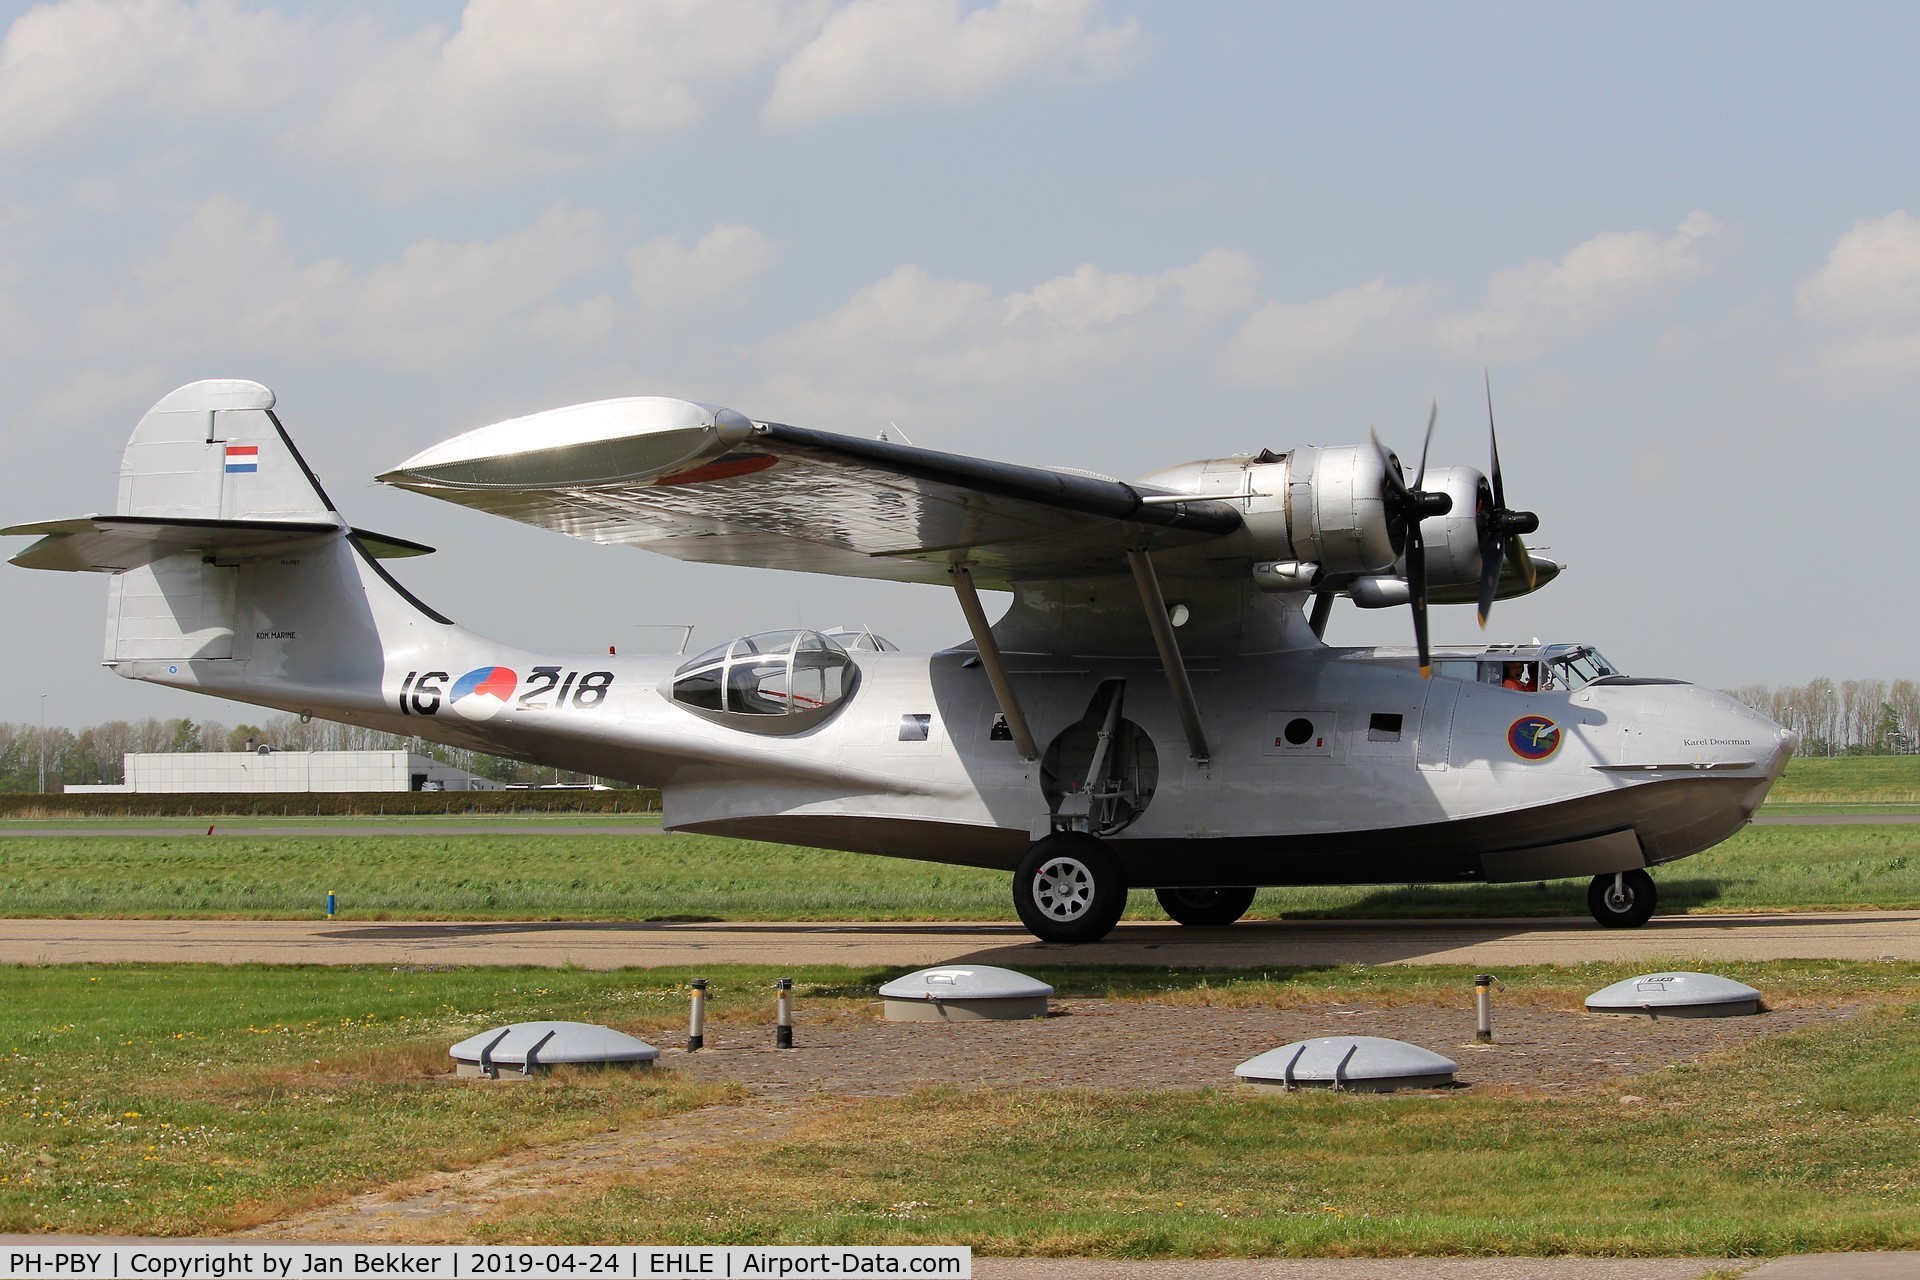 PH-PBY, 1941 Consolidated PBY-5A Catalina C/N 300, Lelystad Airport. The aircraft is sold te an American party and leaves Holland next month